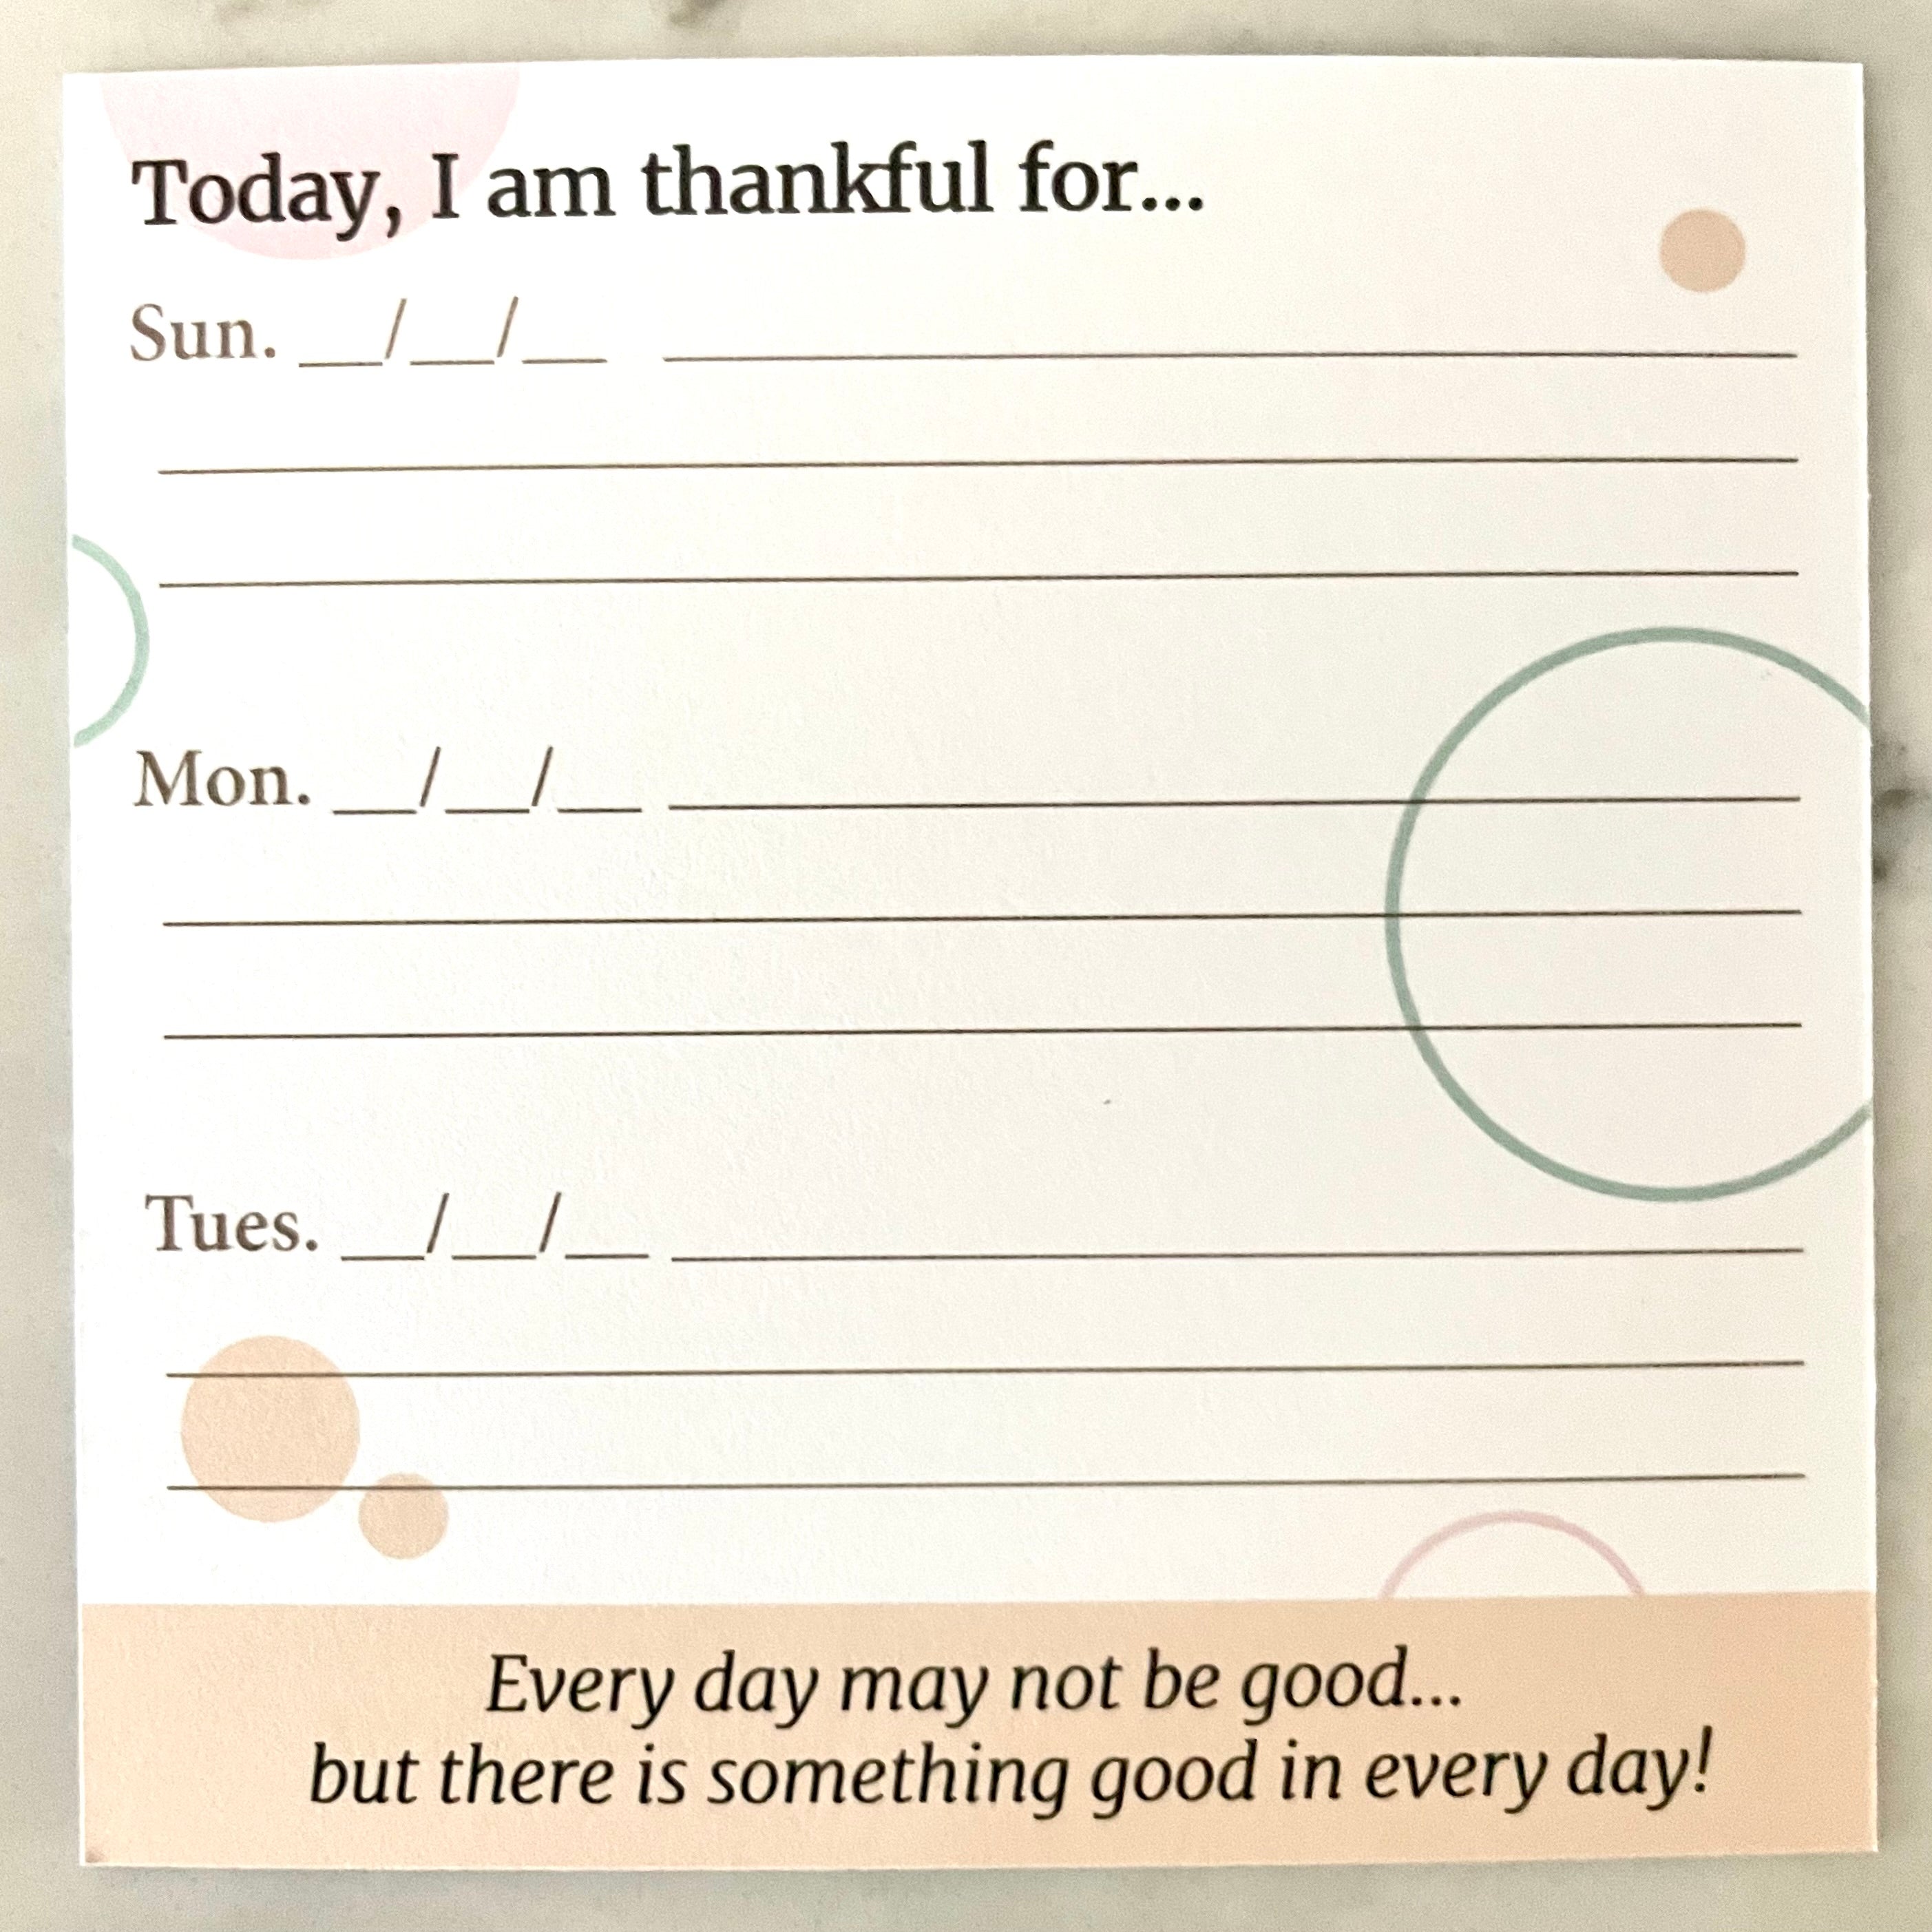 Journal Cards to Grow In Gratitude